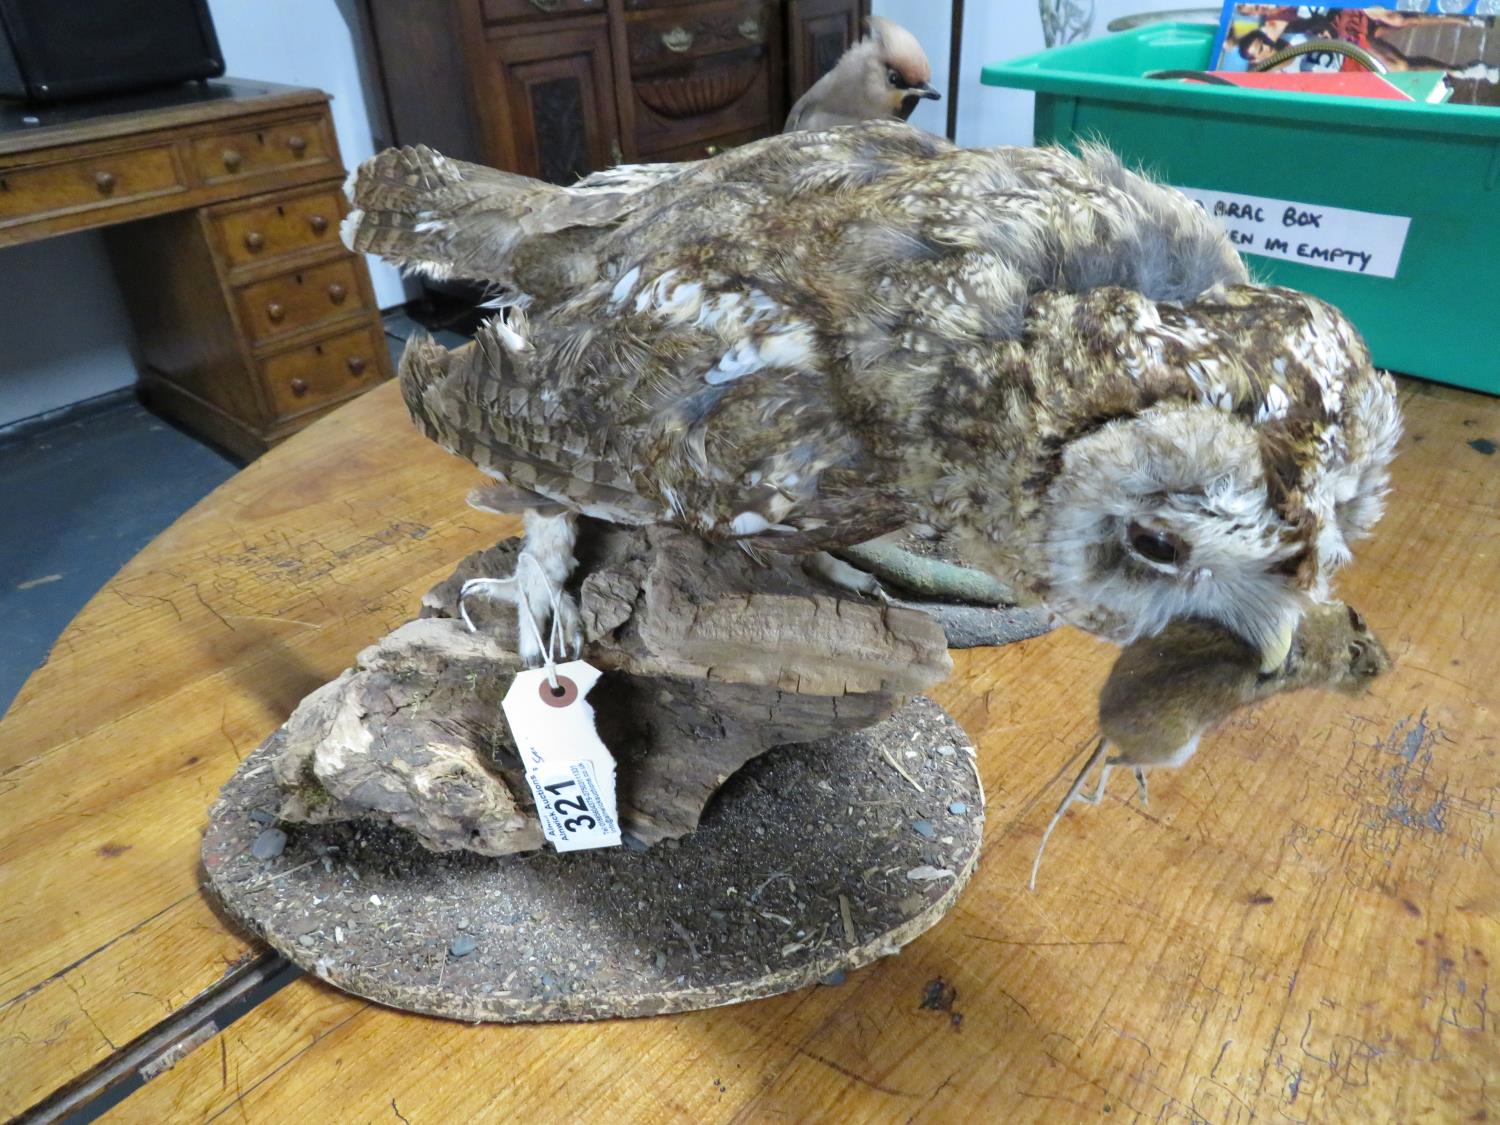 Taxidermy owl with mouse in beak